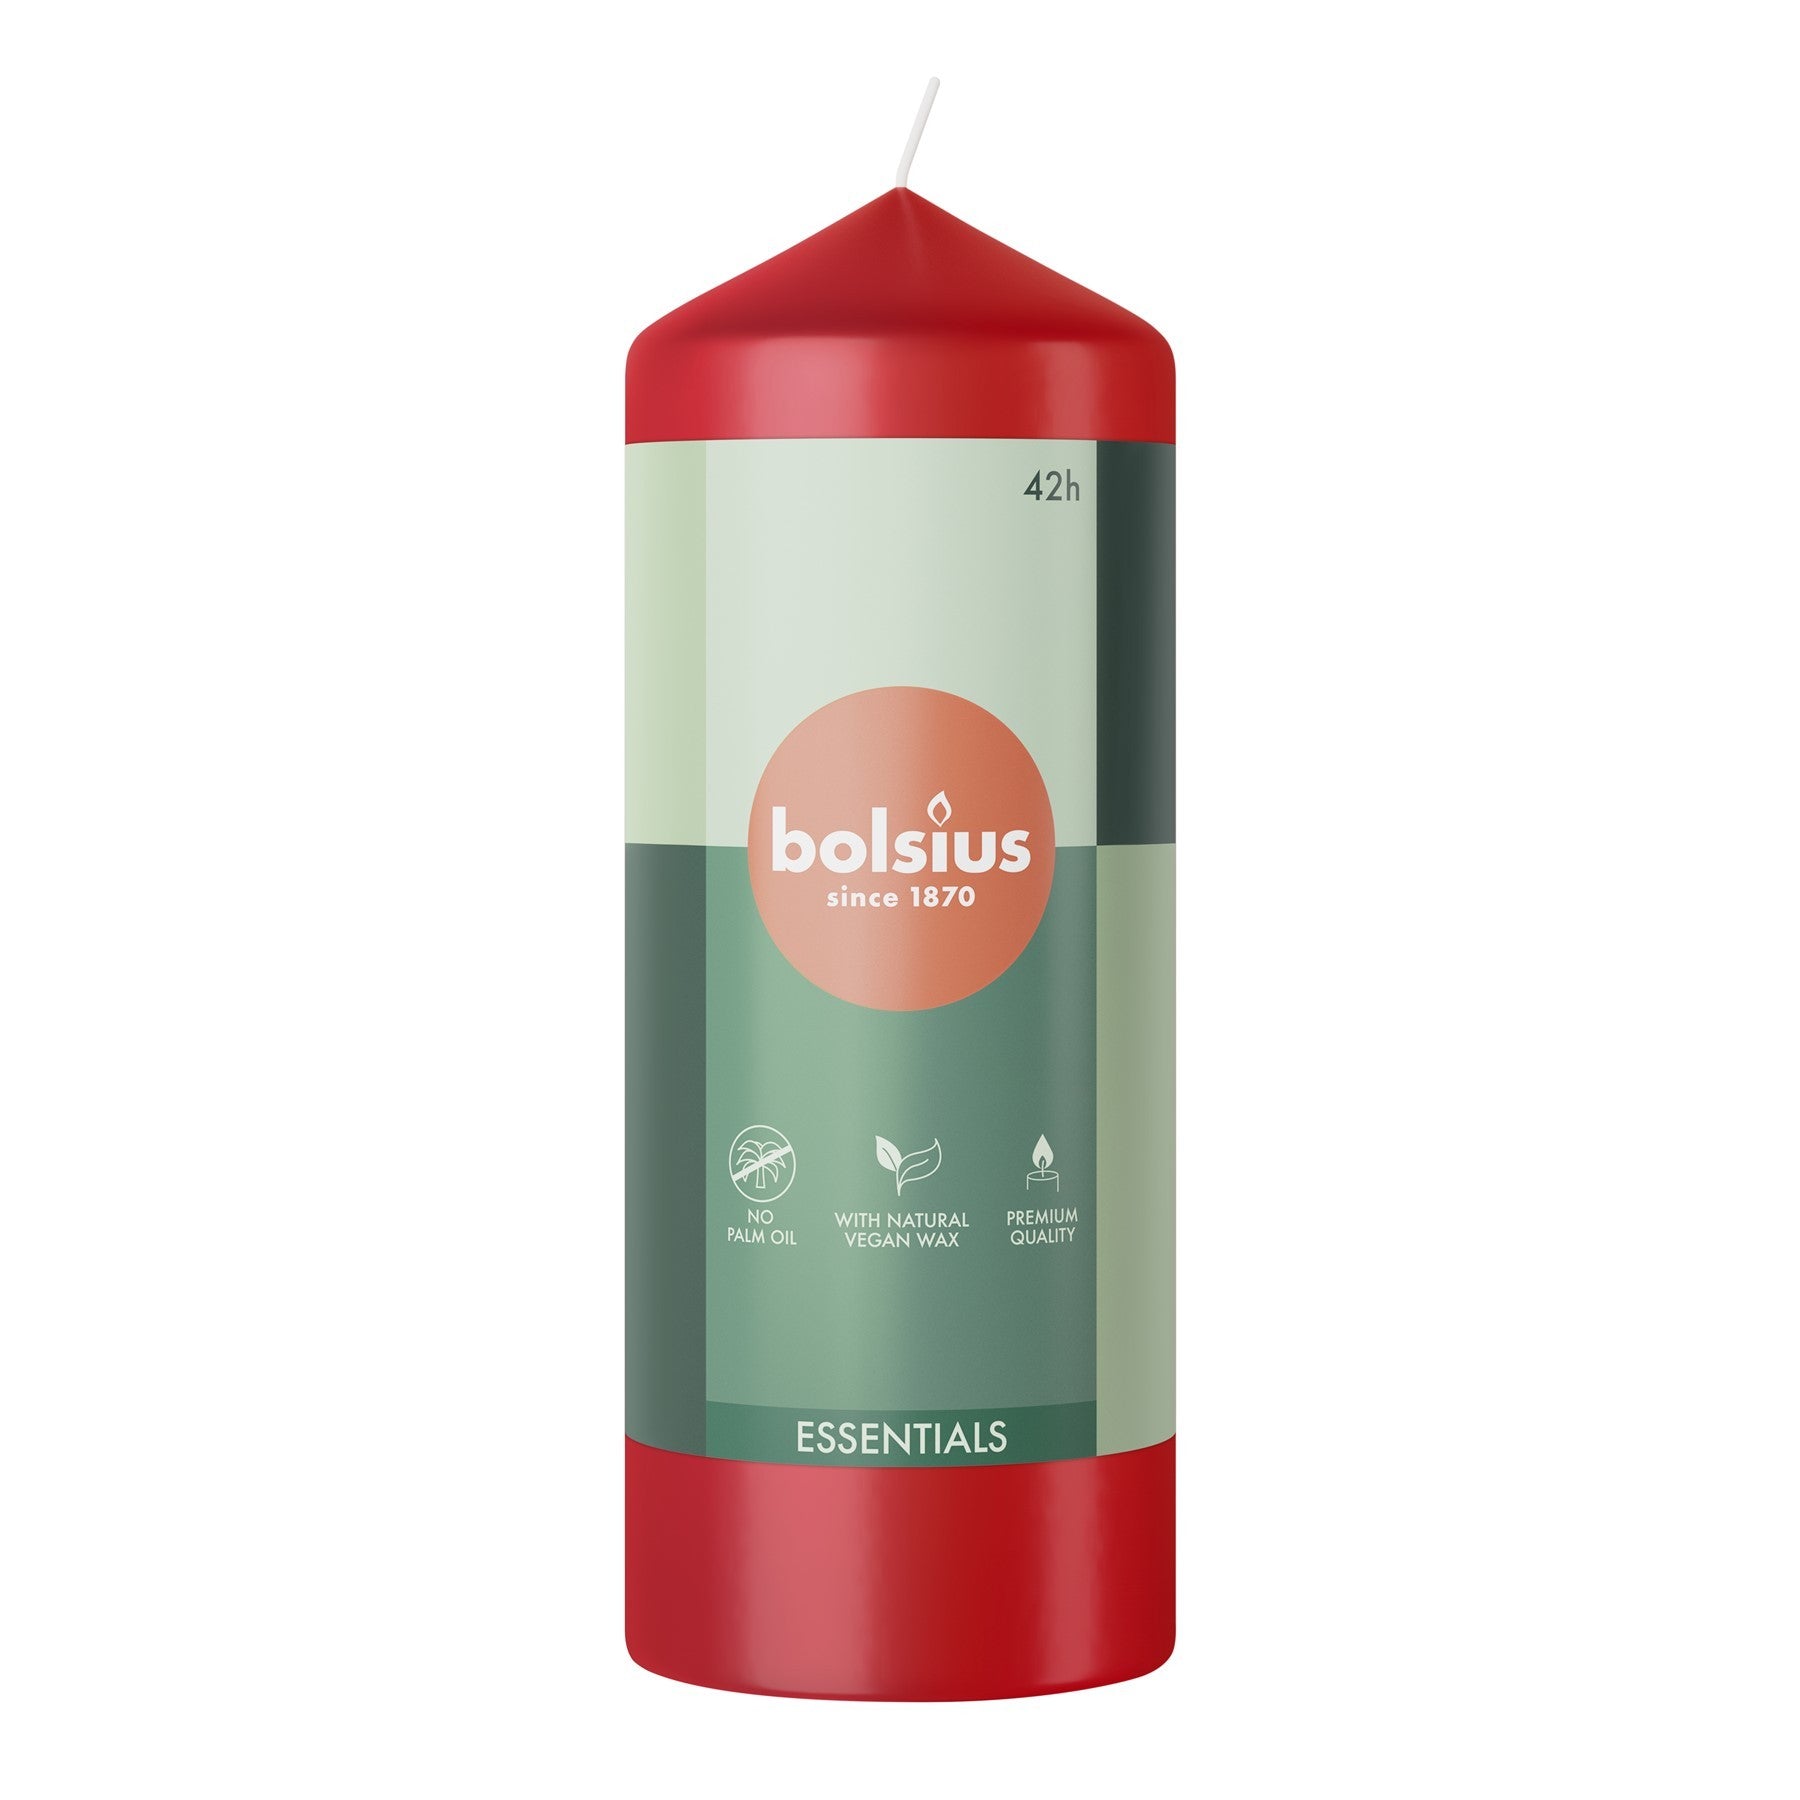 View Bolsius Delicate Red Essential Pillar Candle 150mm x 58mm information